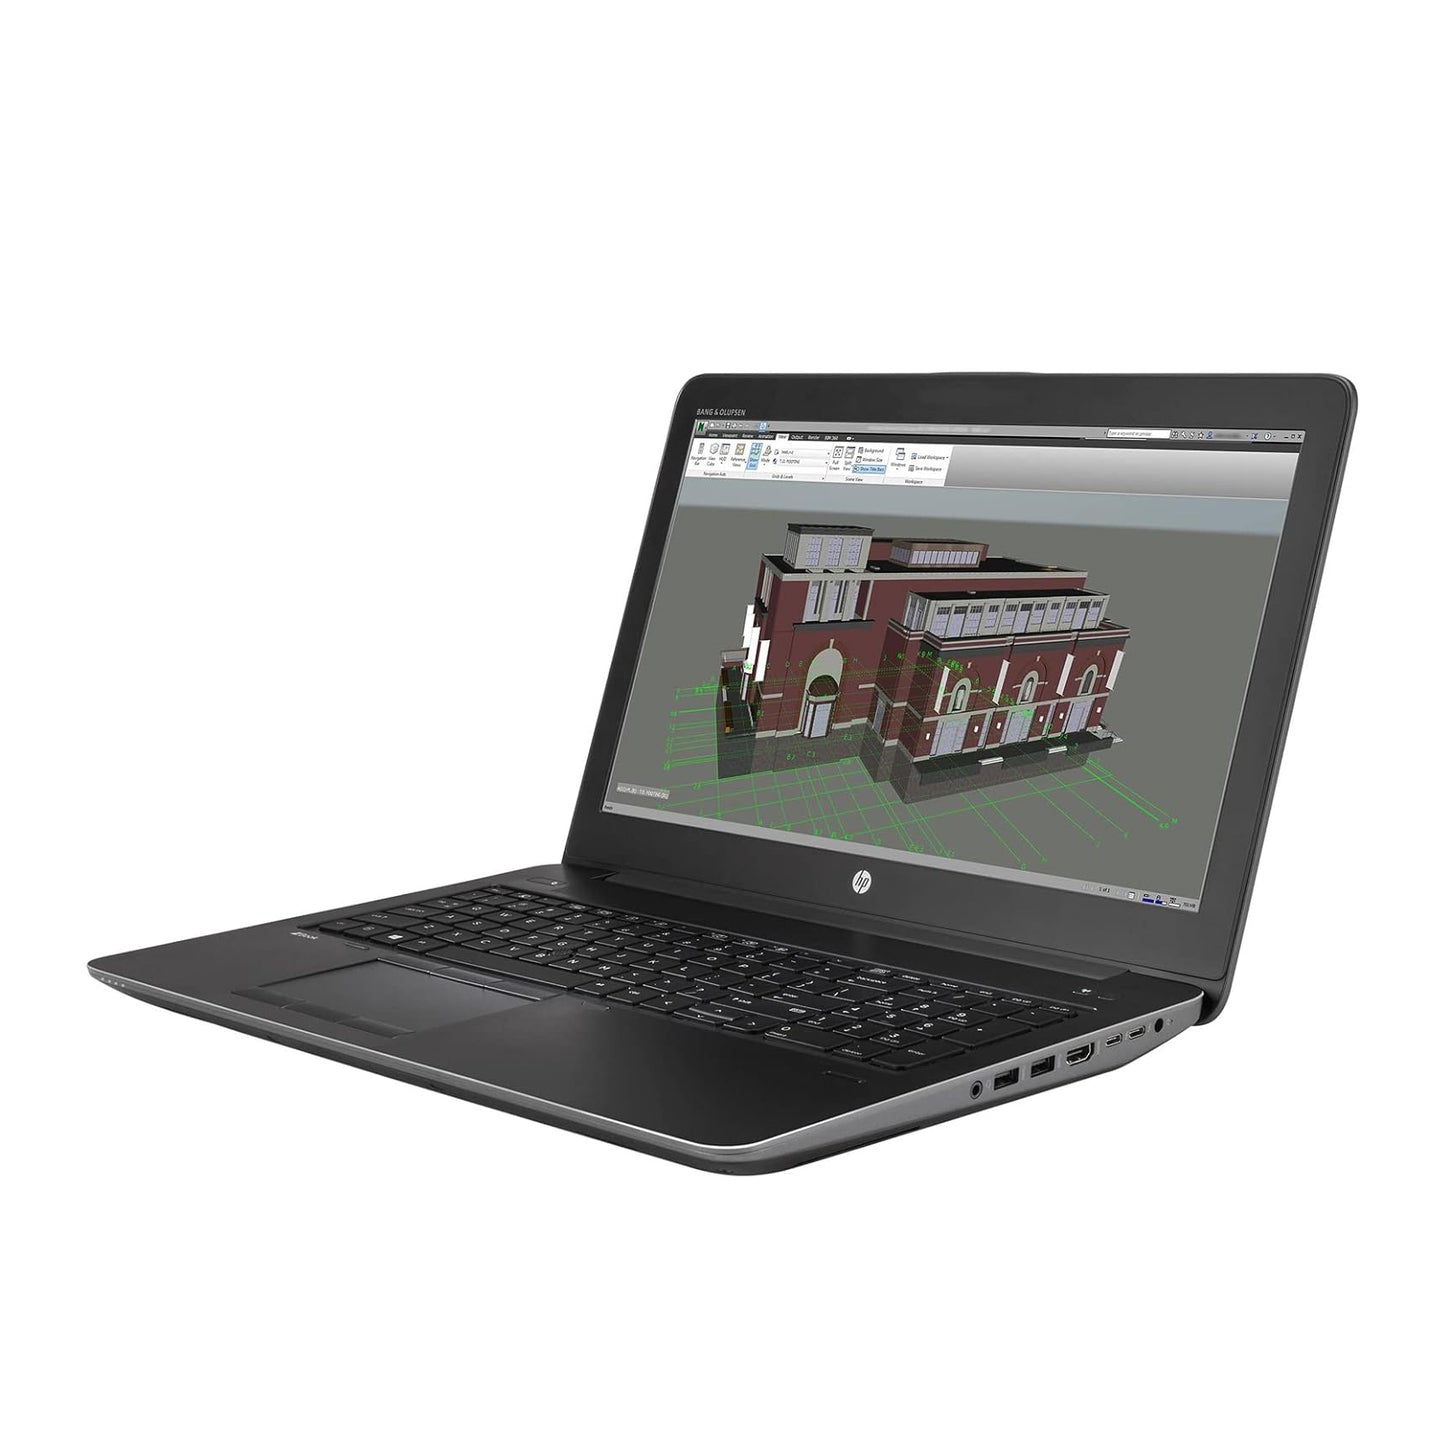 Hp Zbook 15 Core i5-6440hq 15.6" Truecolor Mobile Workstation Laptop Offers (Open Box)